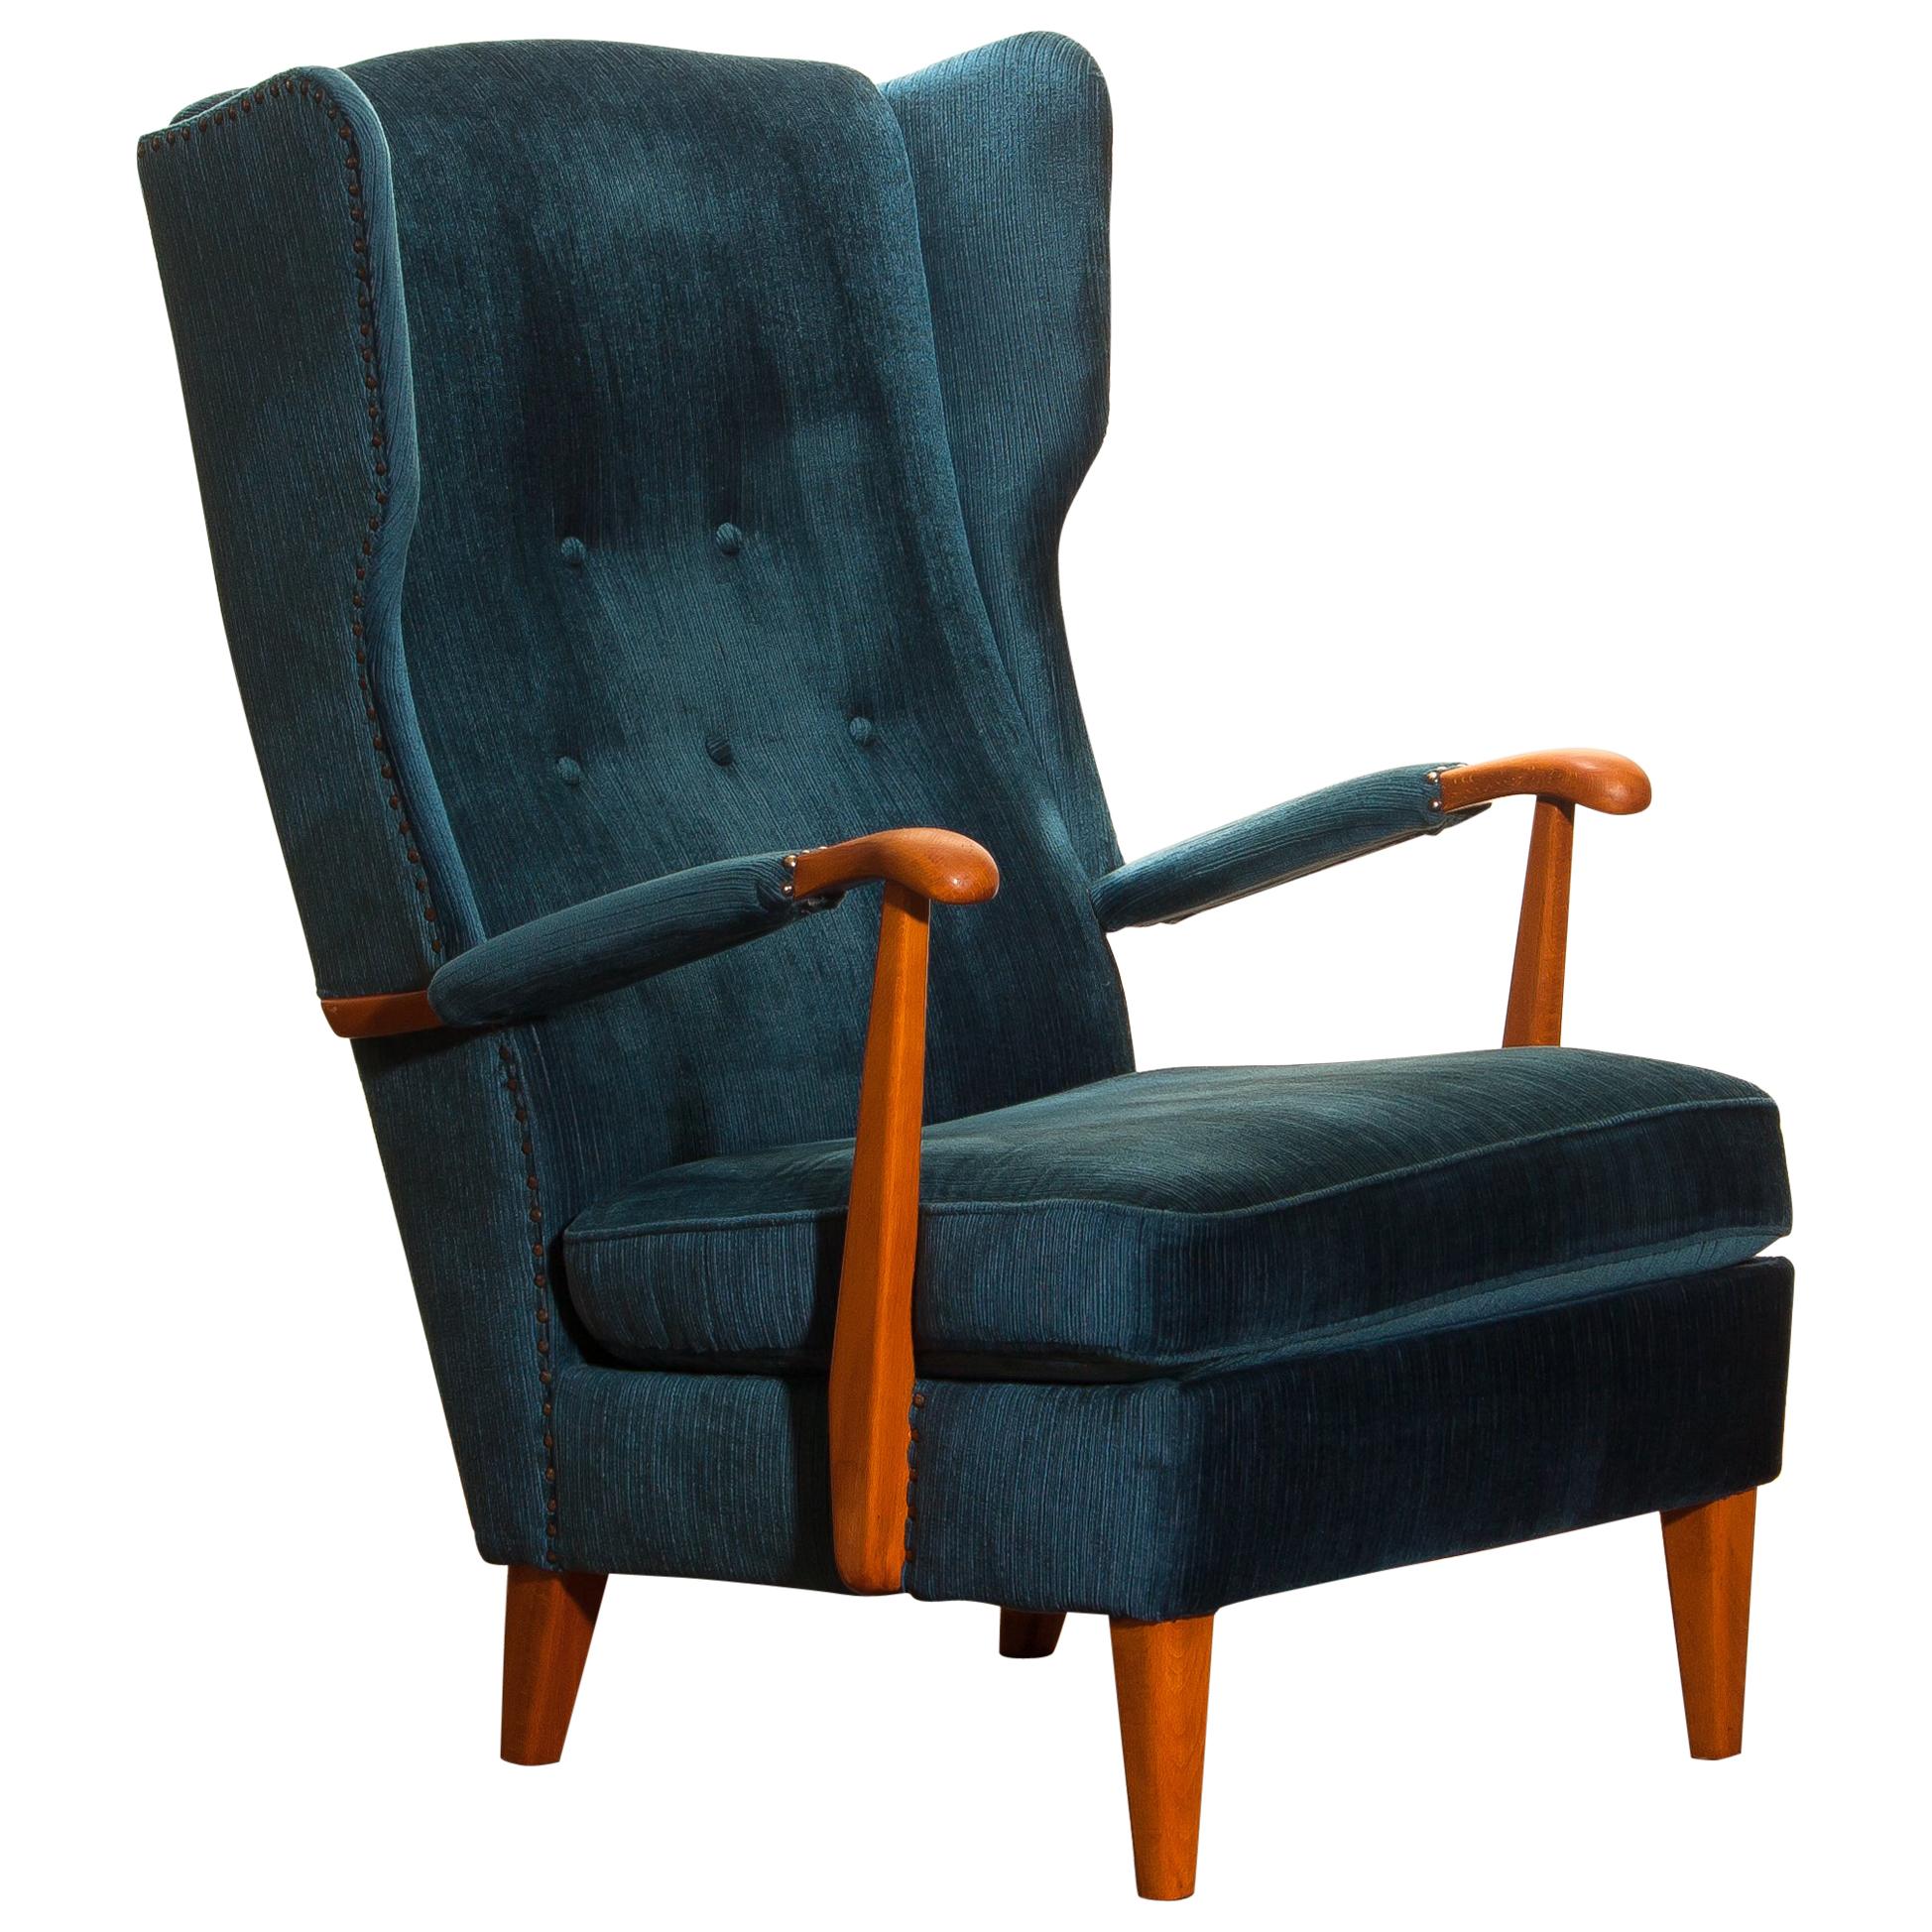 Knolls Moderna Lounge or Wingback Chair in Petrol Rib Velours, 1950s, Sweden